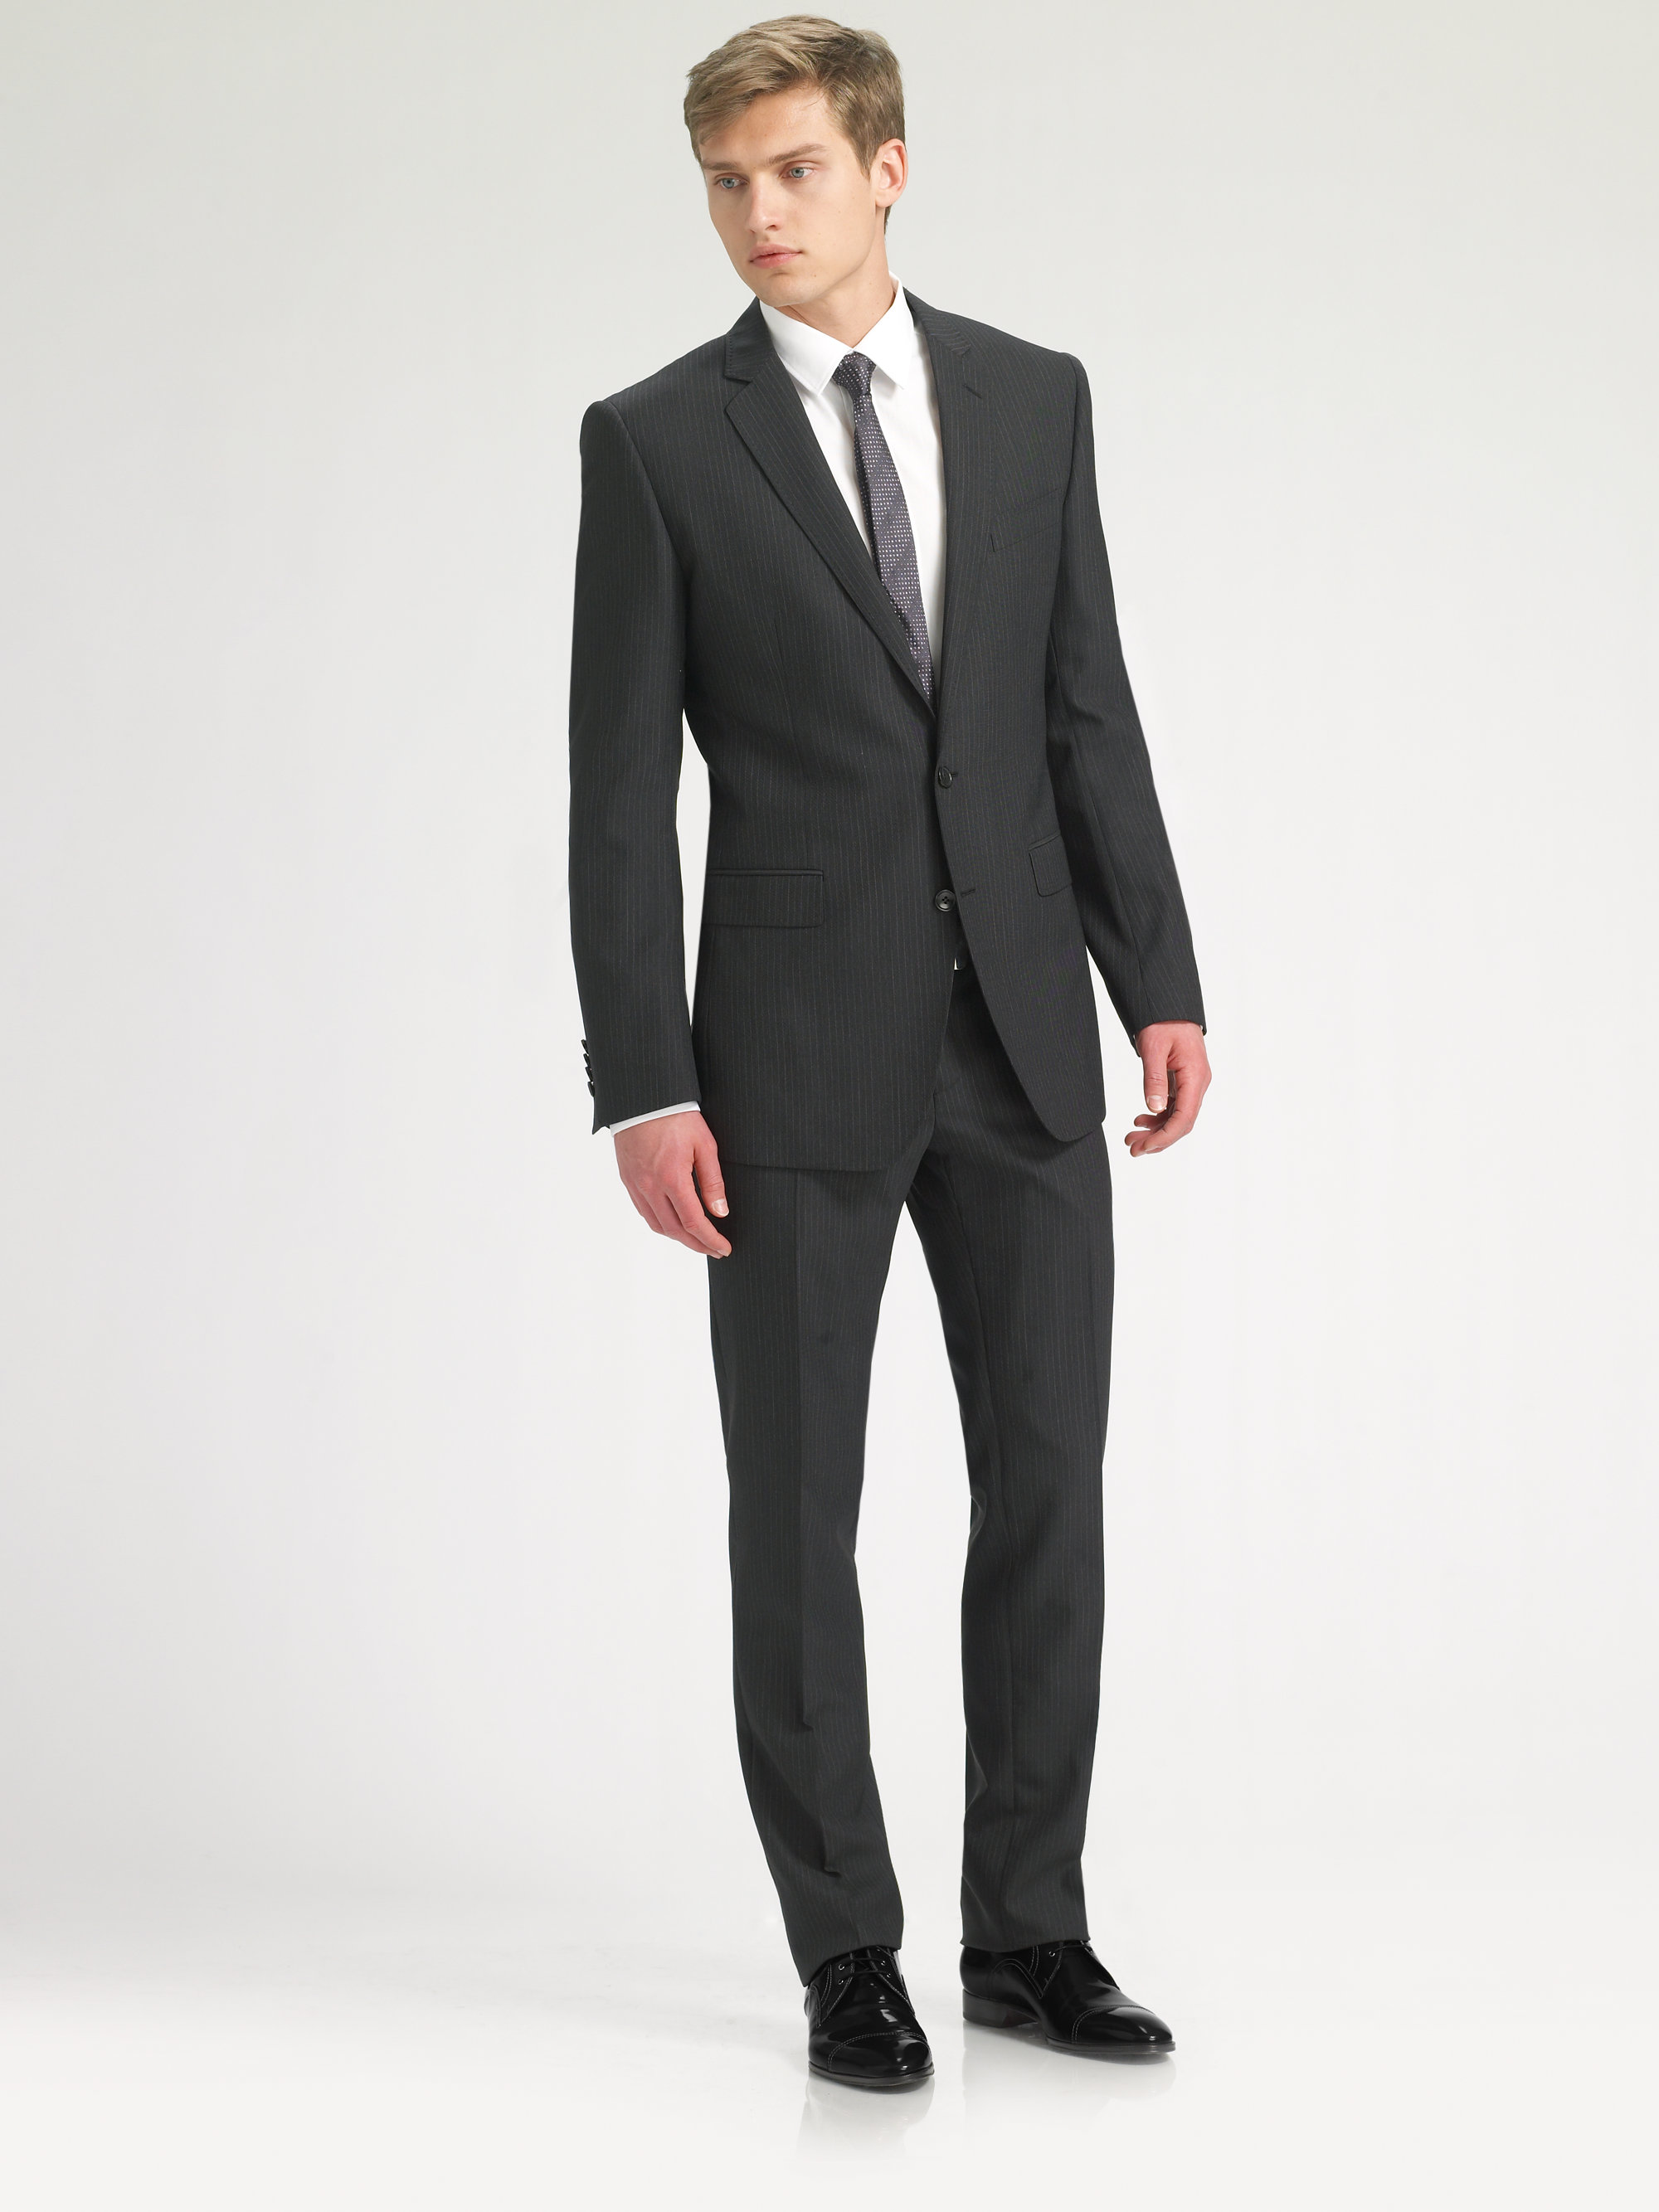 Lyst - Dolce & gabbana Striped Suit in Gray for Men